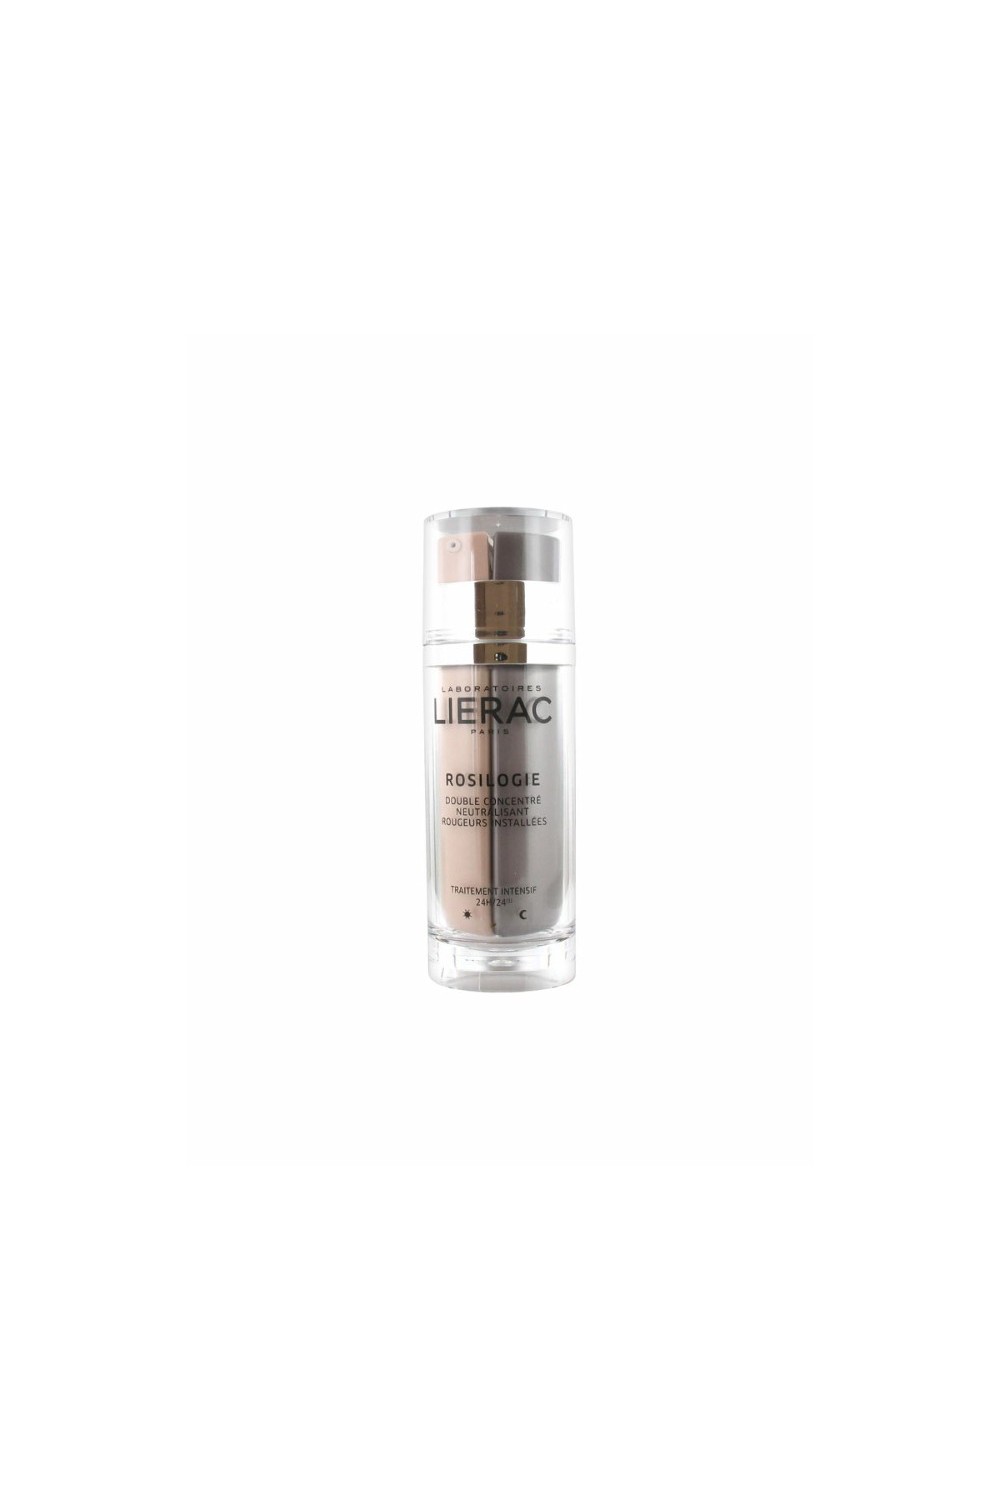 Lierac Rosilogie Double Concentrate Redness Correction Neutralizing 30ml